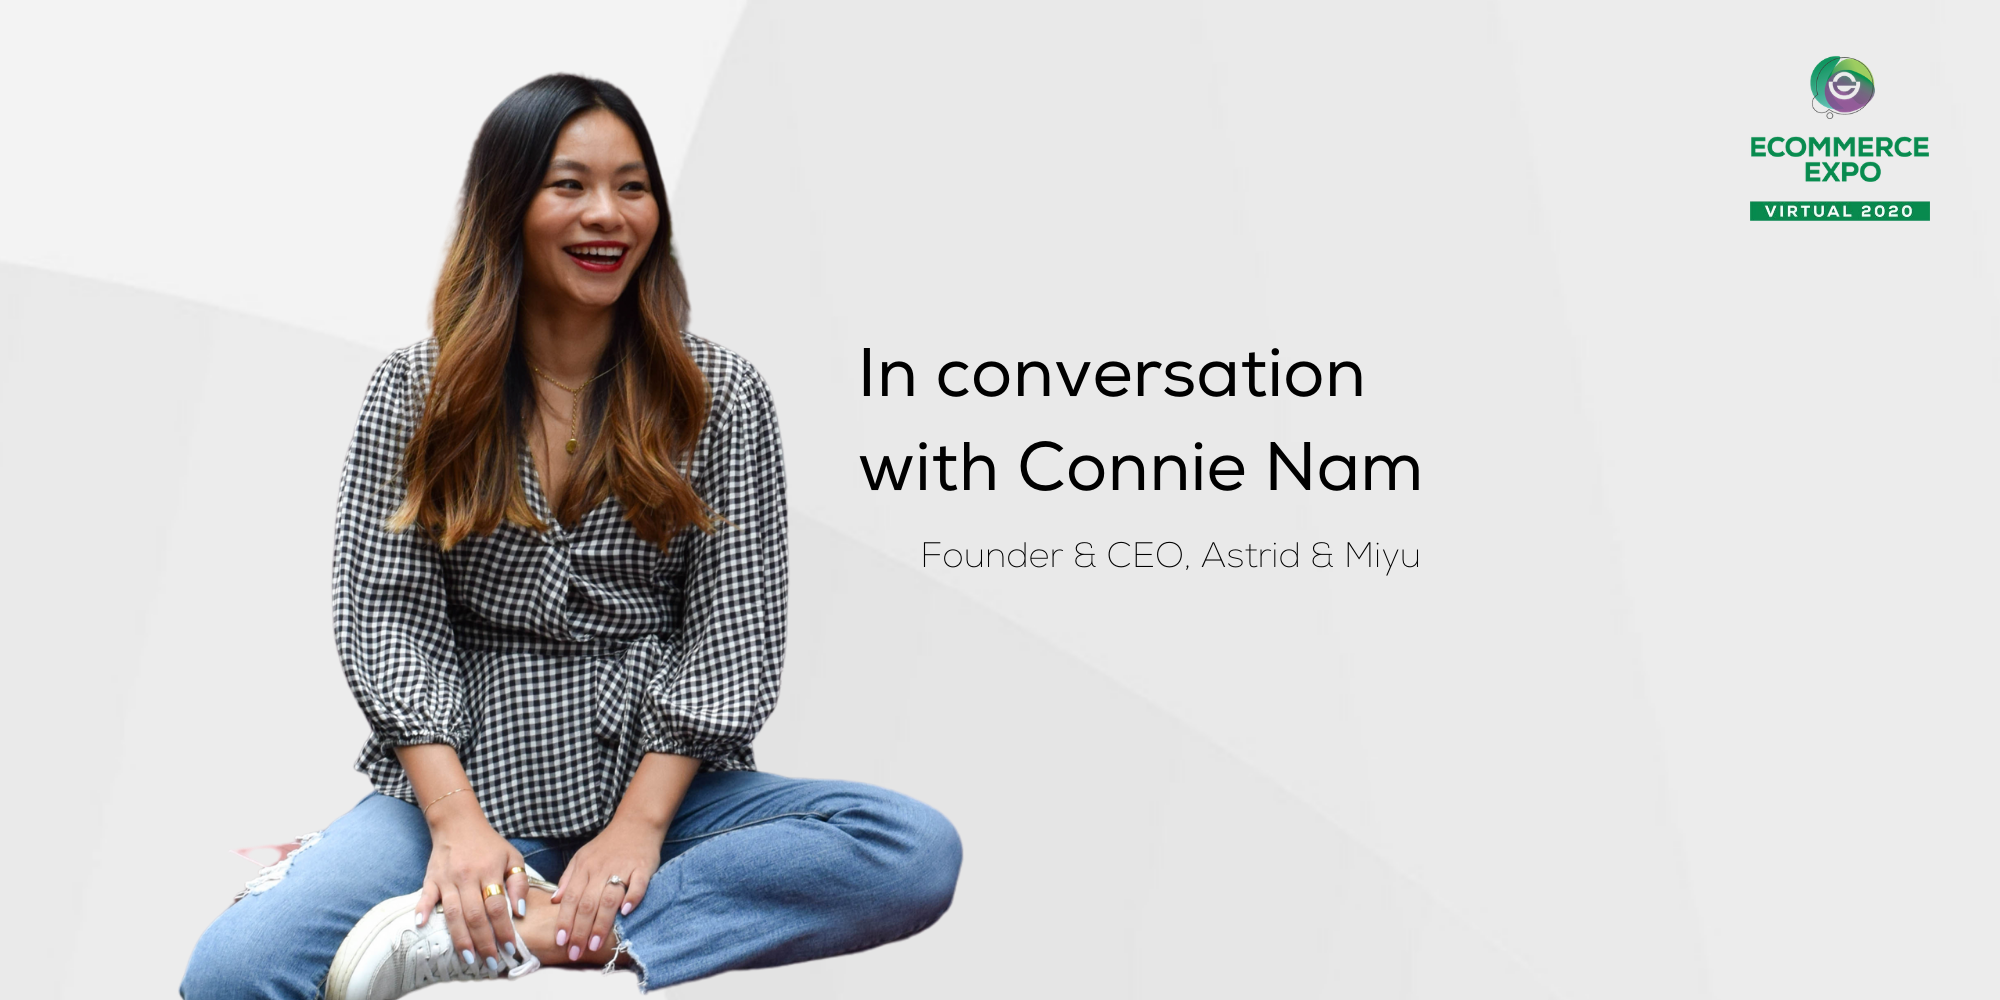 eCommerce Expo Virtual 2020: In conversation with Connie Nam